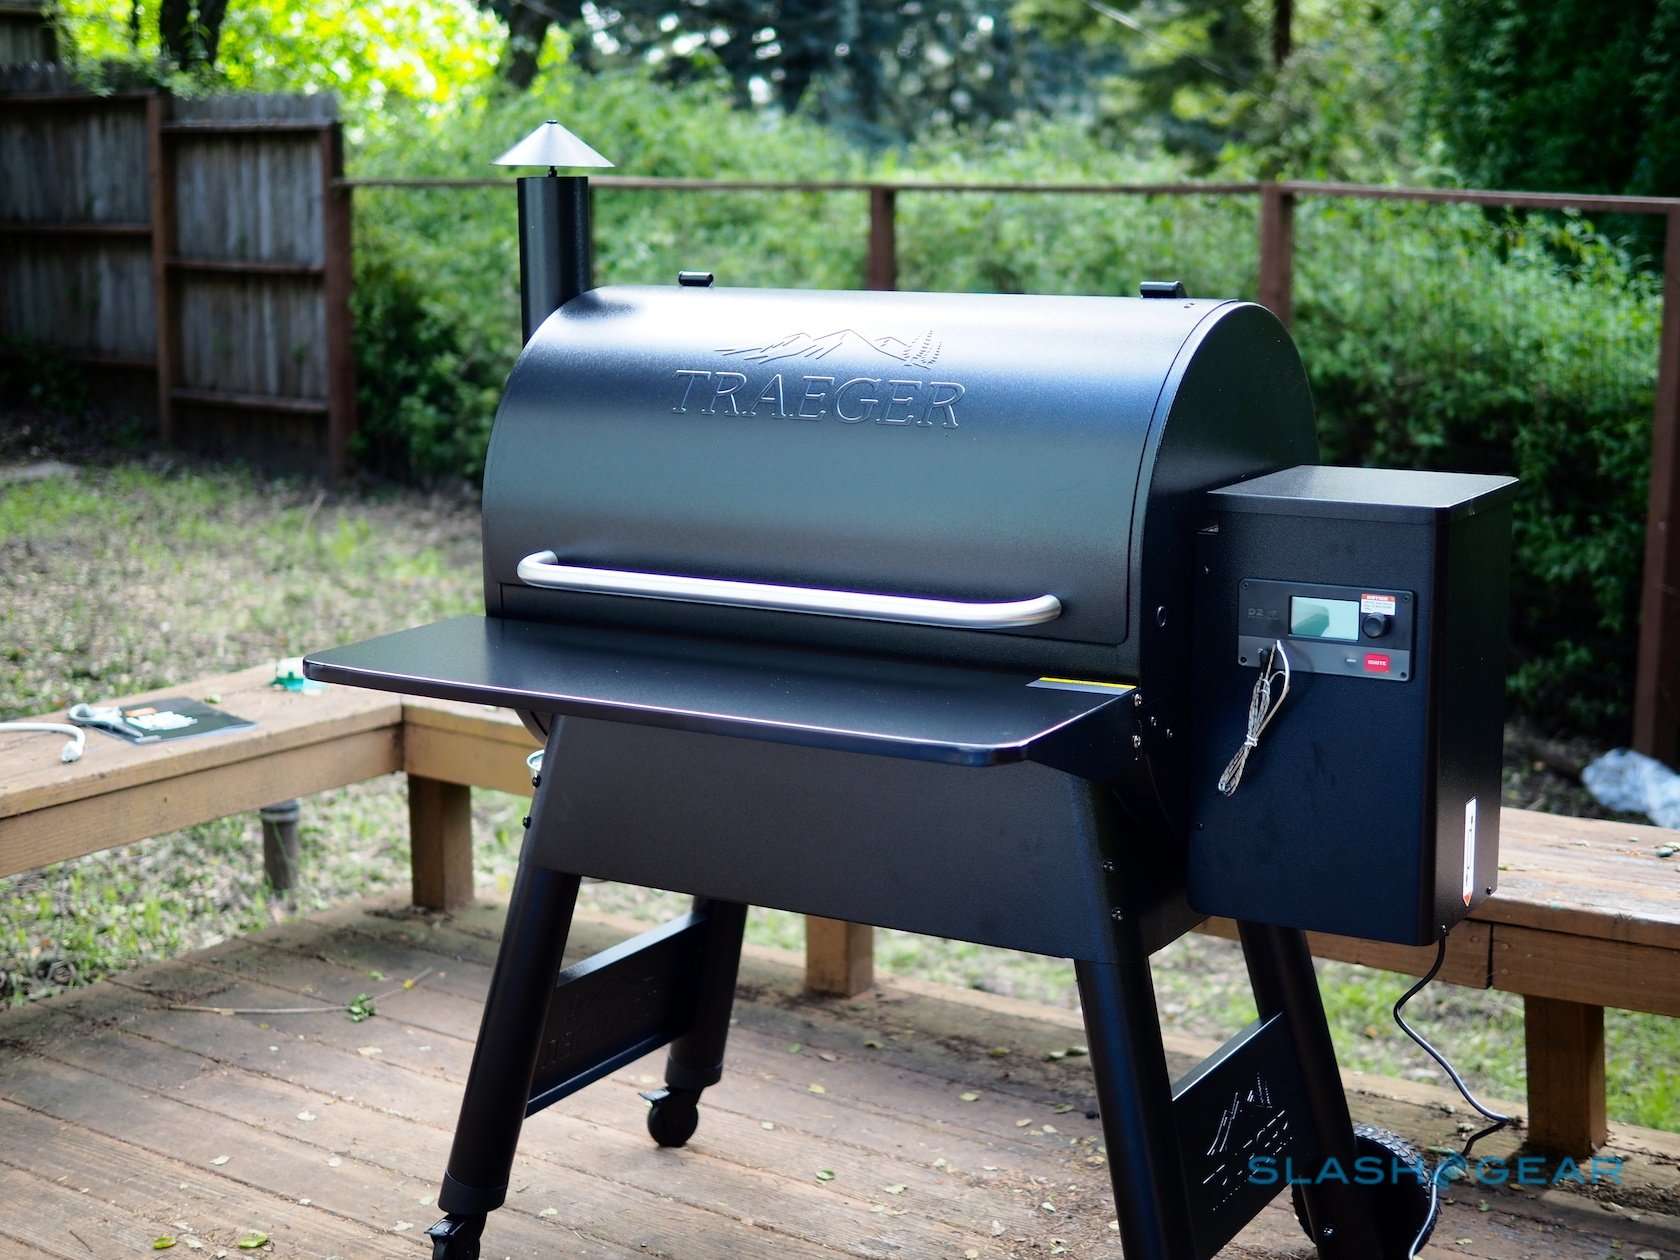 Traeger Pro 780 Review: Why your next pellet grill needs ...